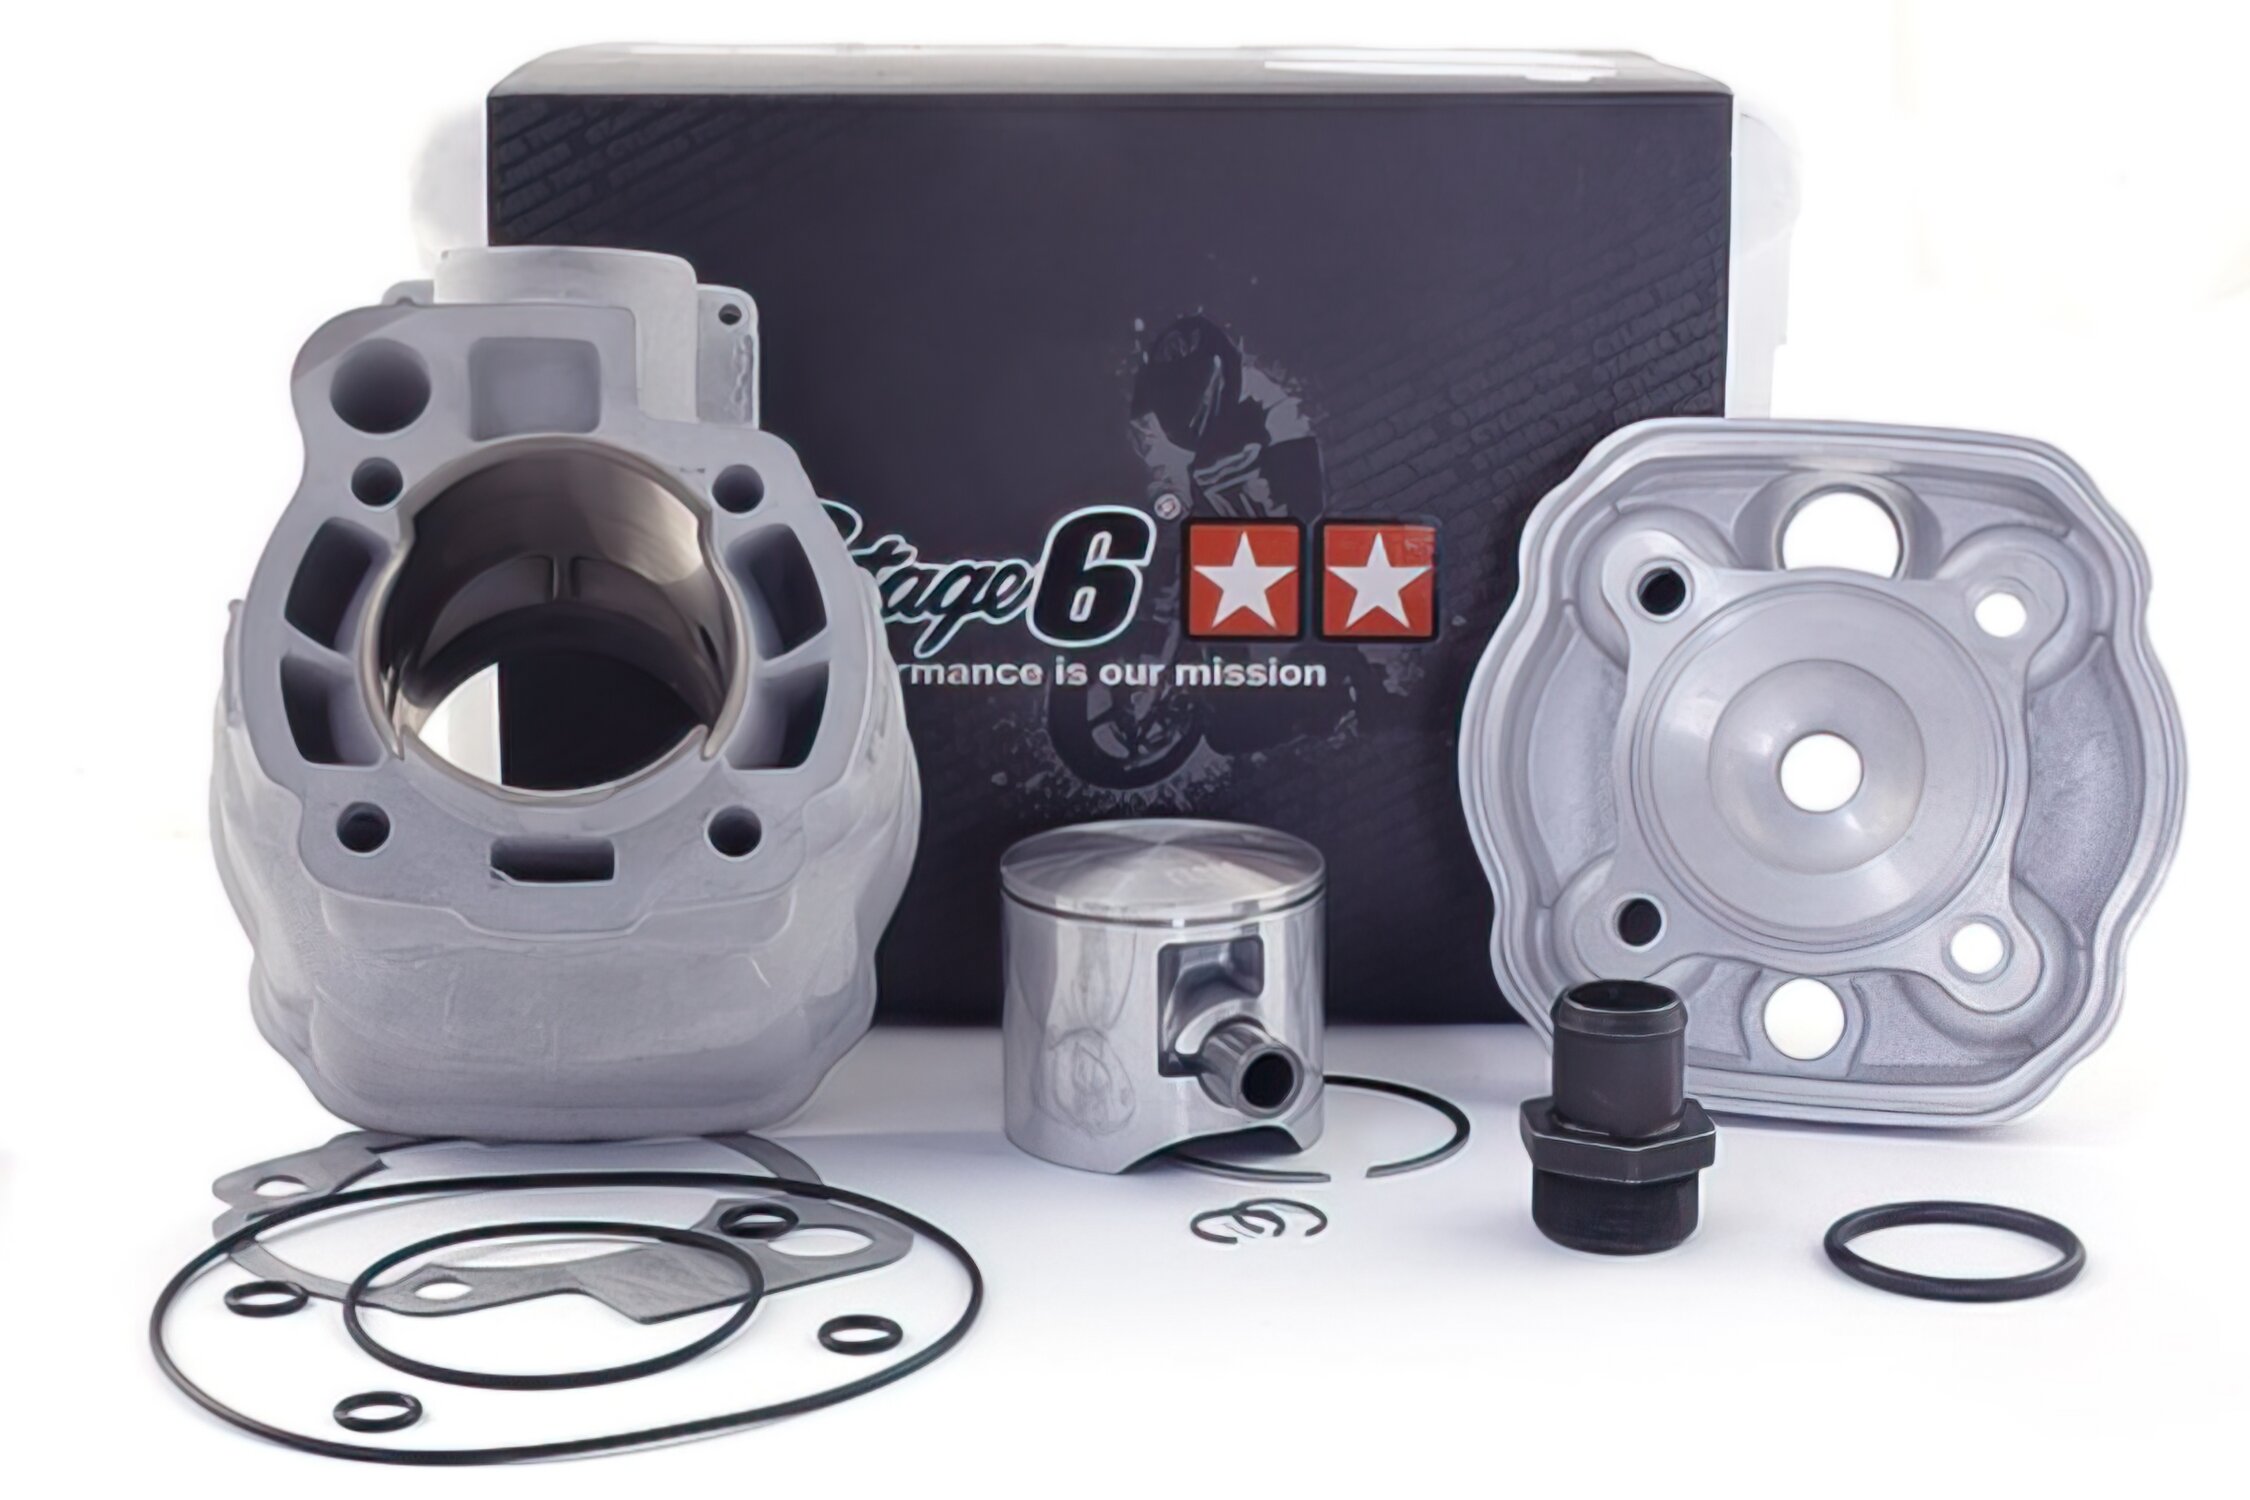 CILINDRO KIT STAGE6 ALUMINIO 77CC BIG RACING DT50X AM6 0